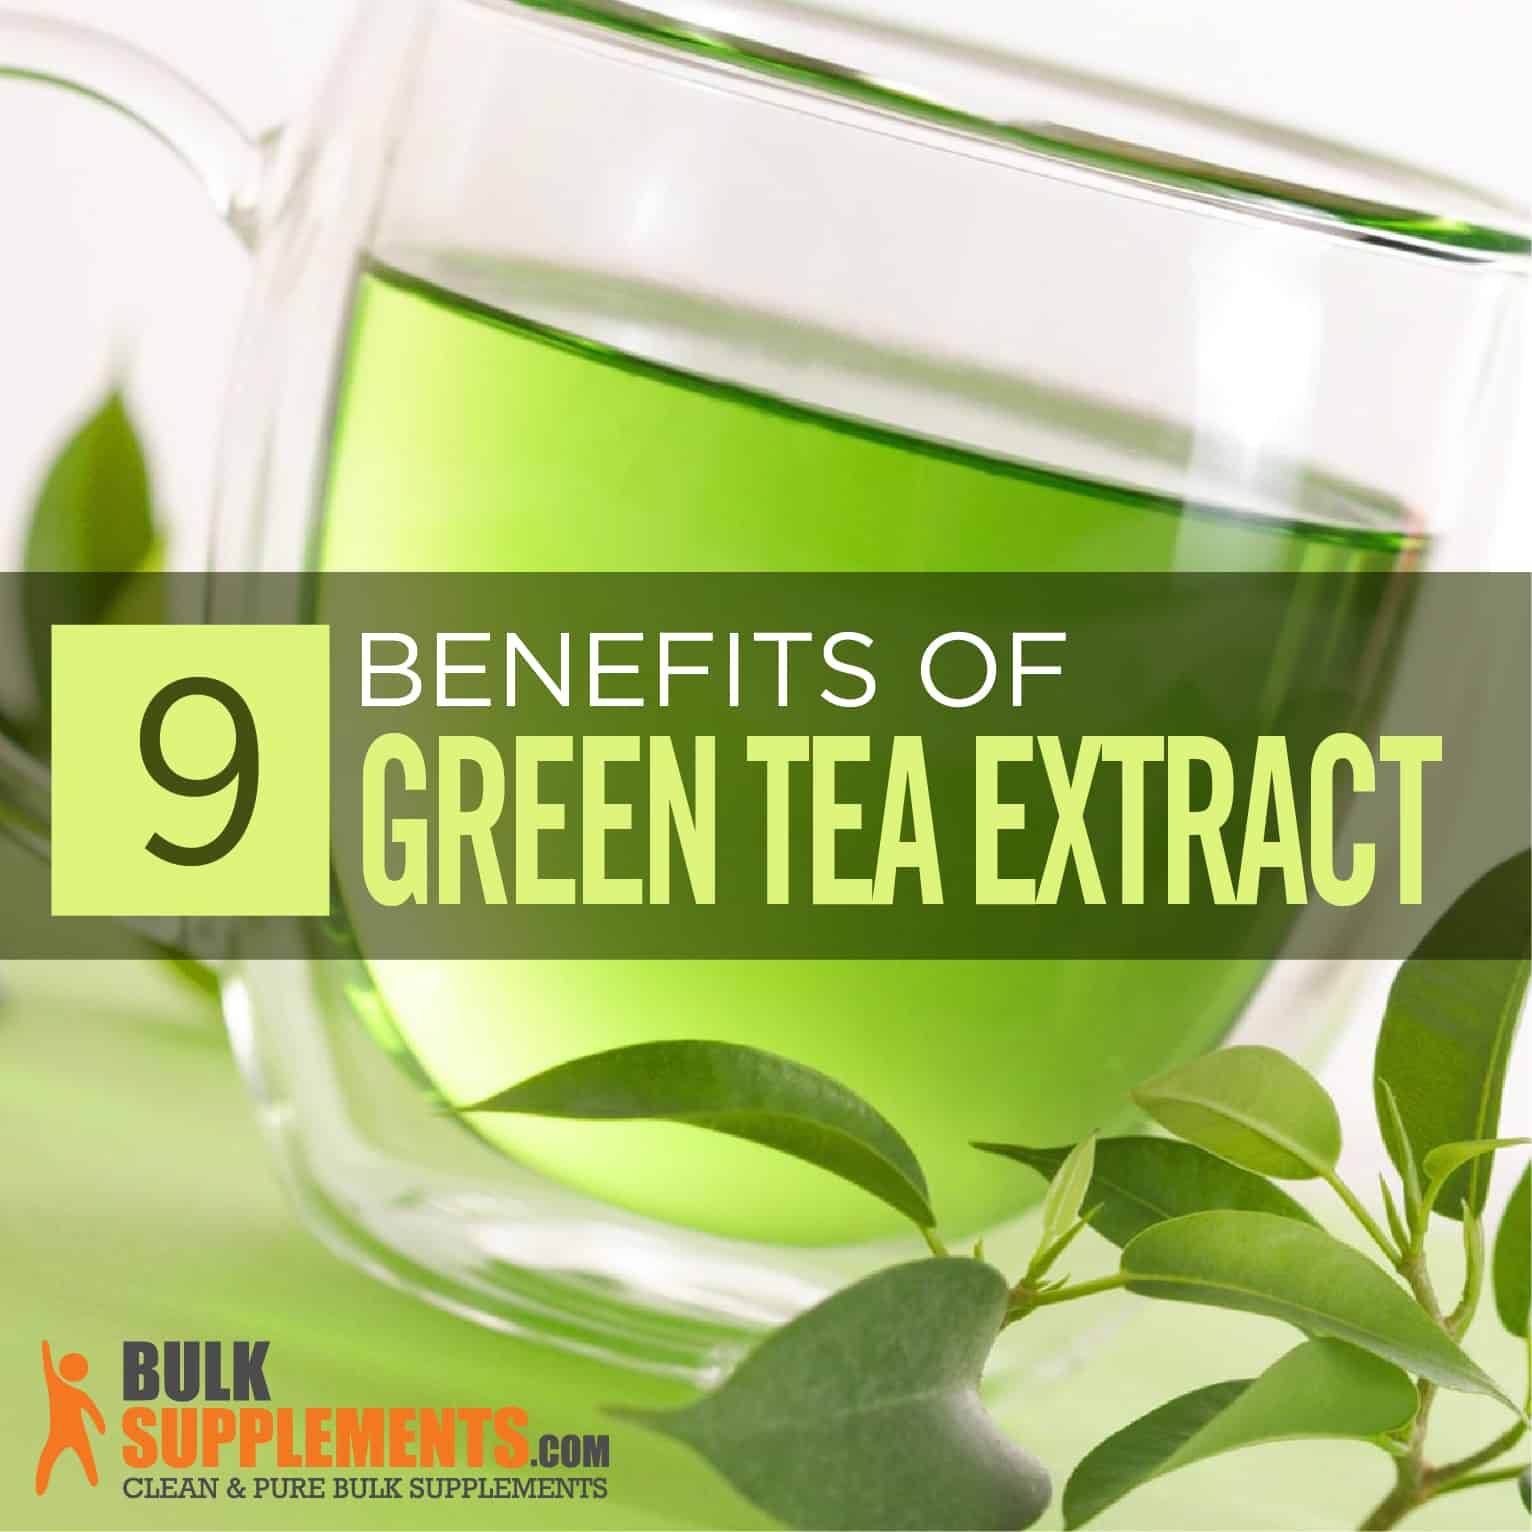 green tea extract benefits, side effects and dosage